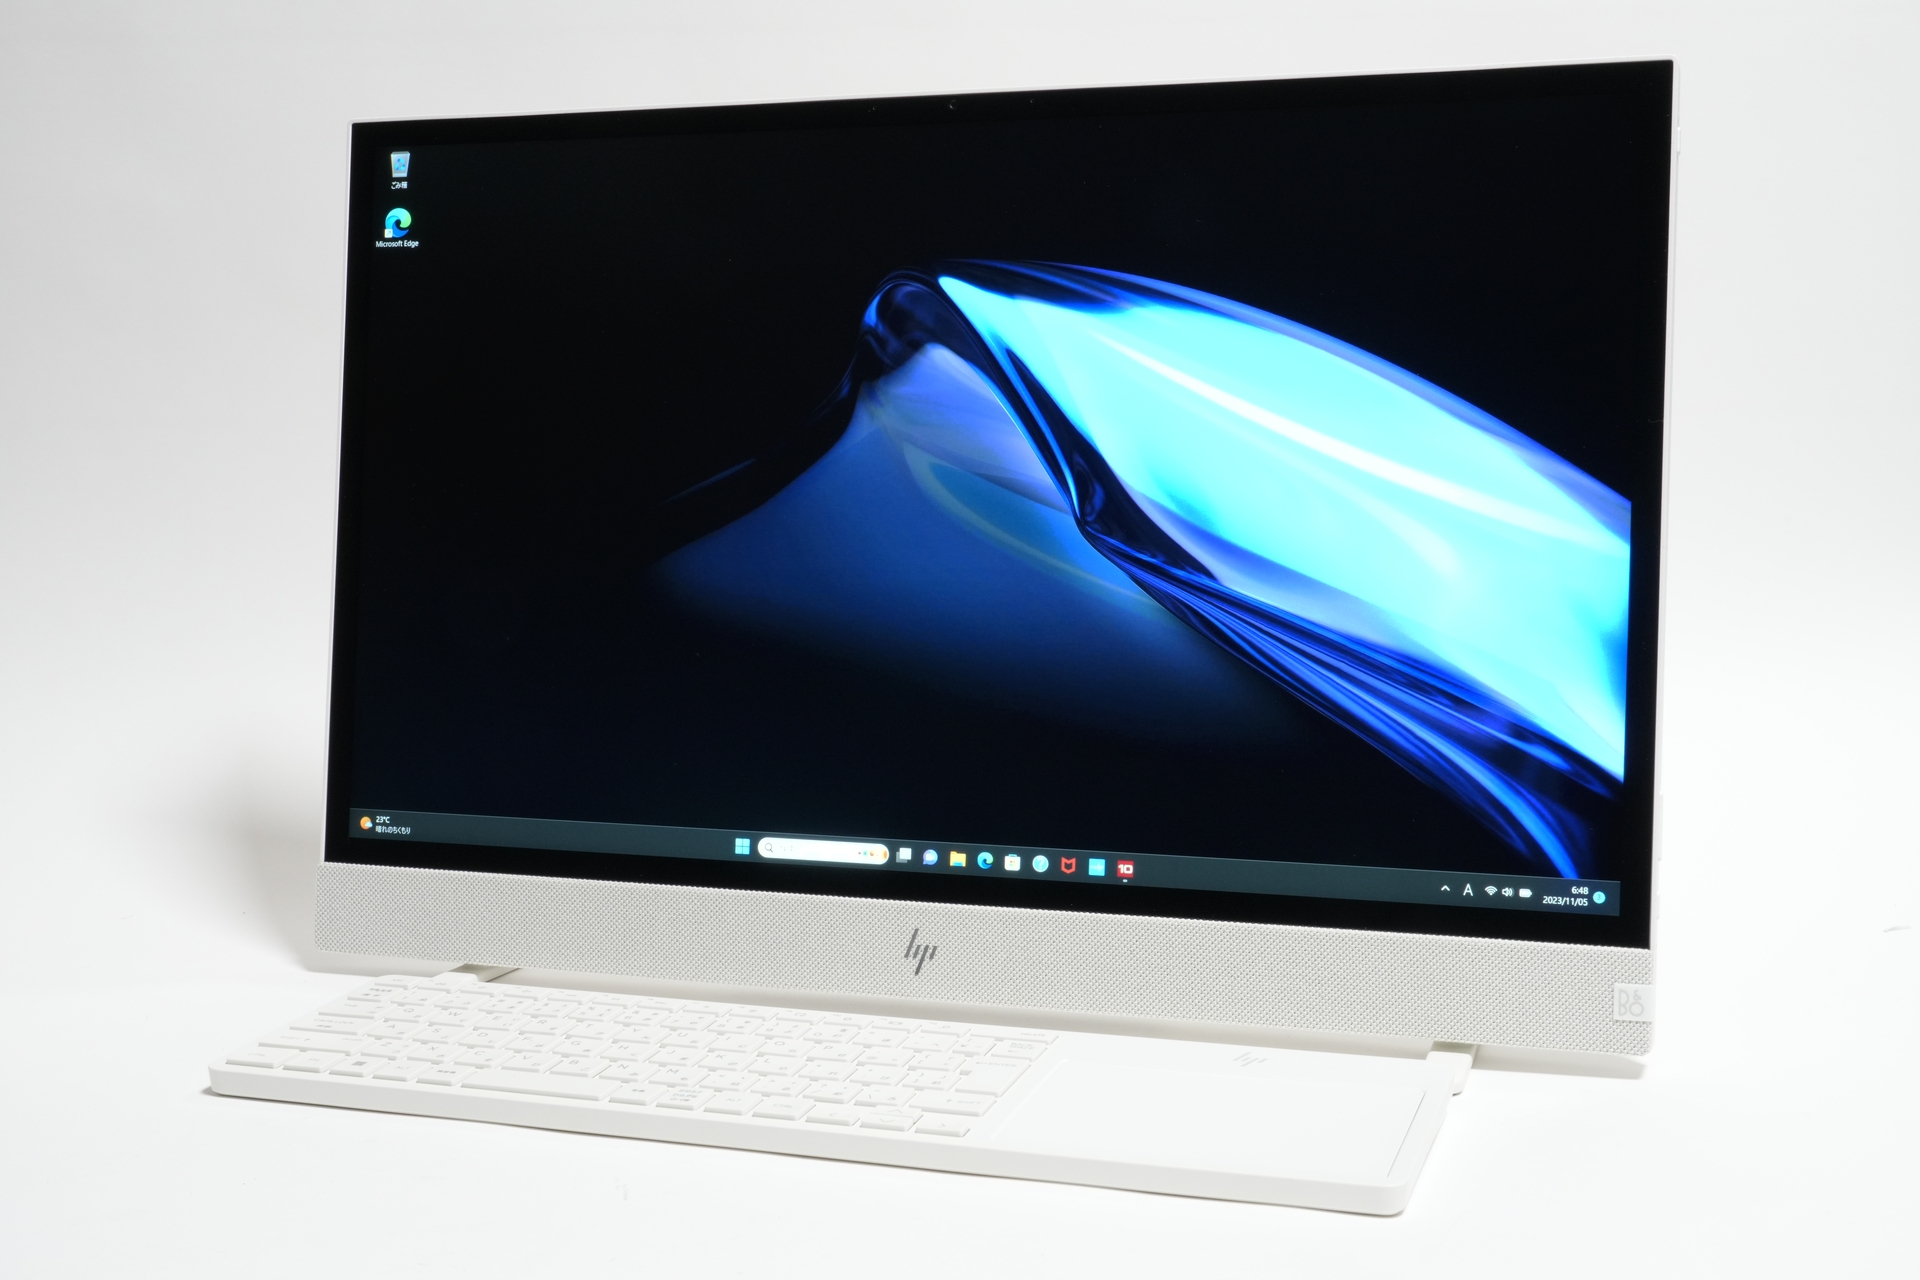 PC短評】ハンドル付きでバッテリ内蔵の「HP ENVY Move All-in-One」は